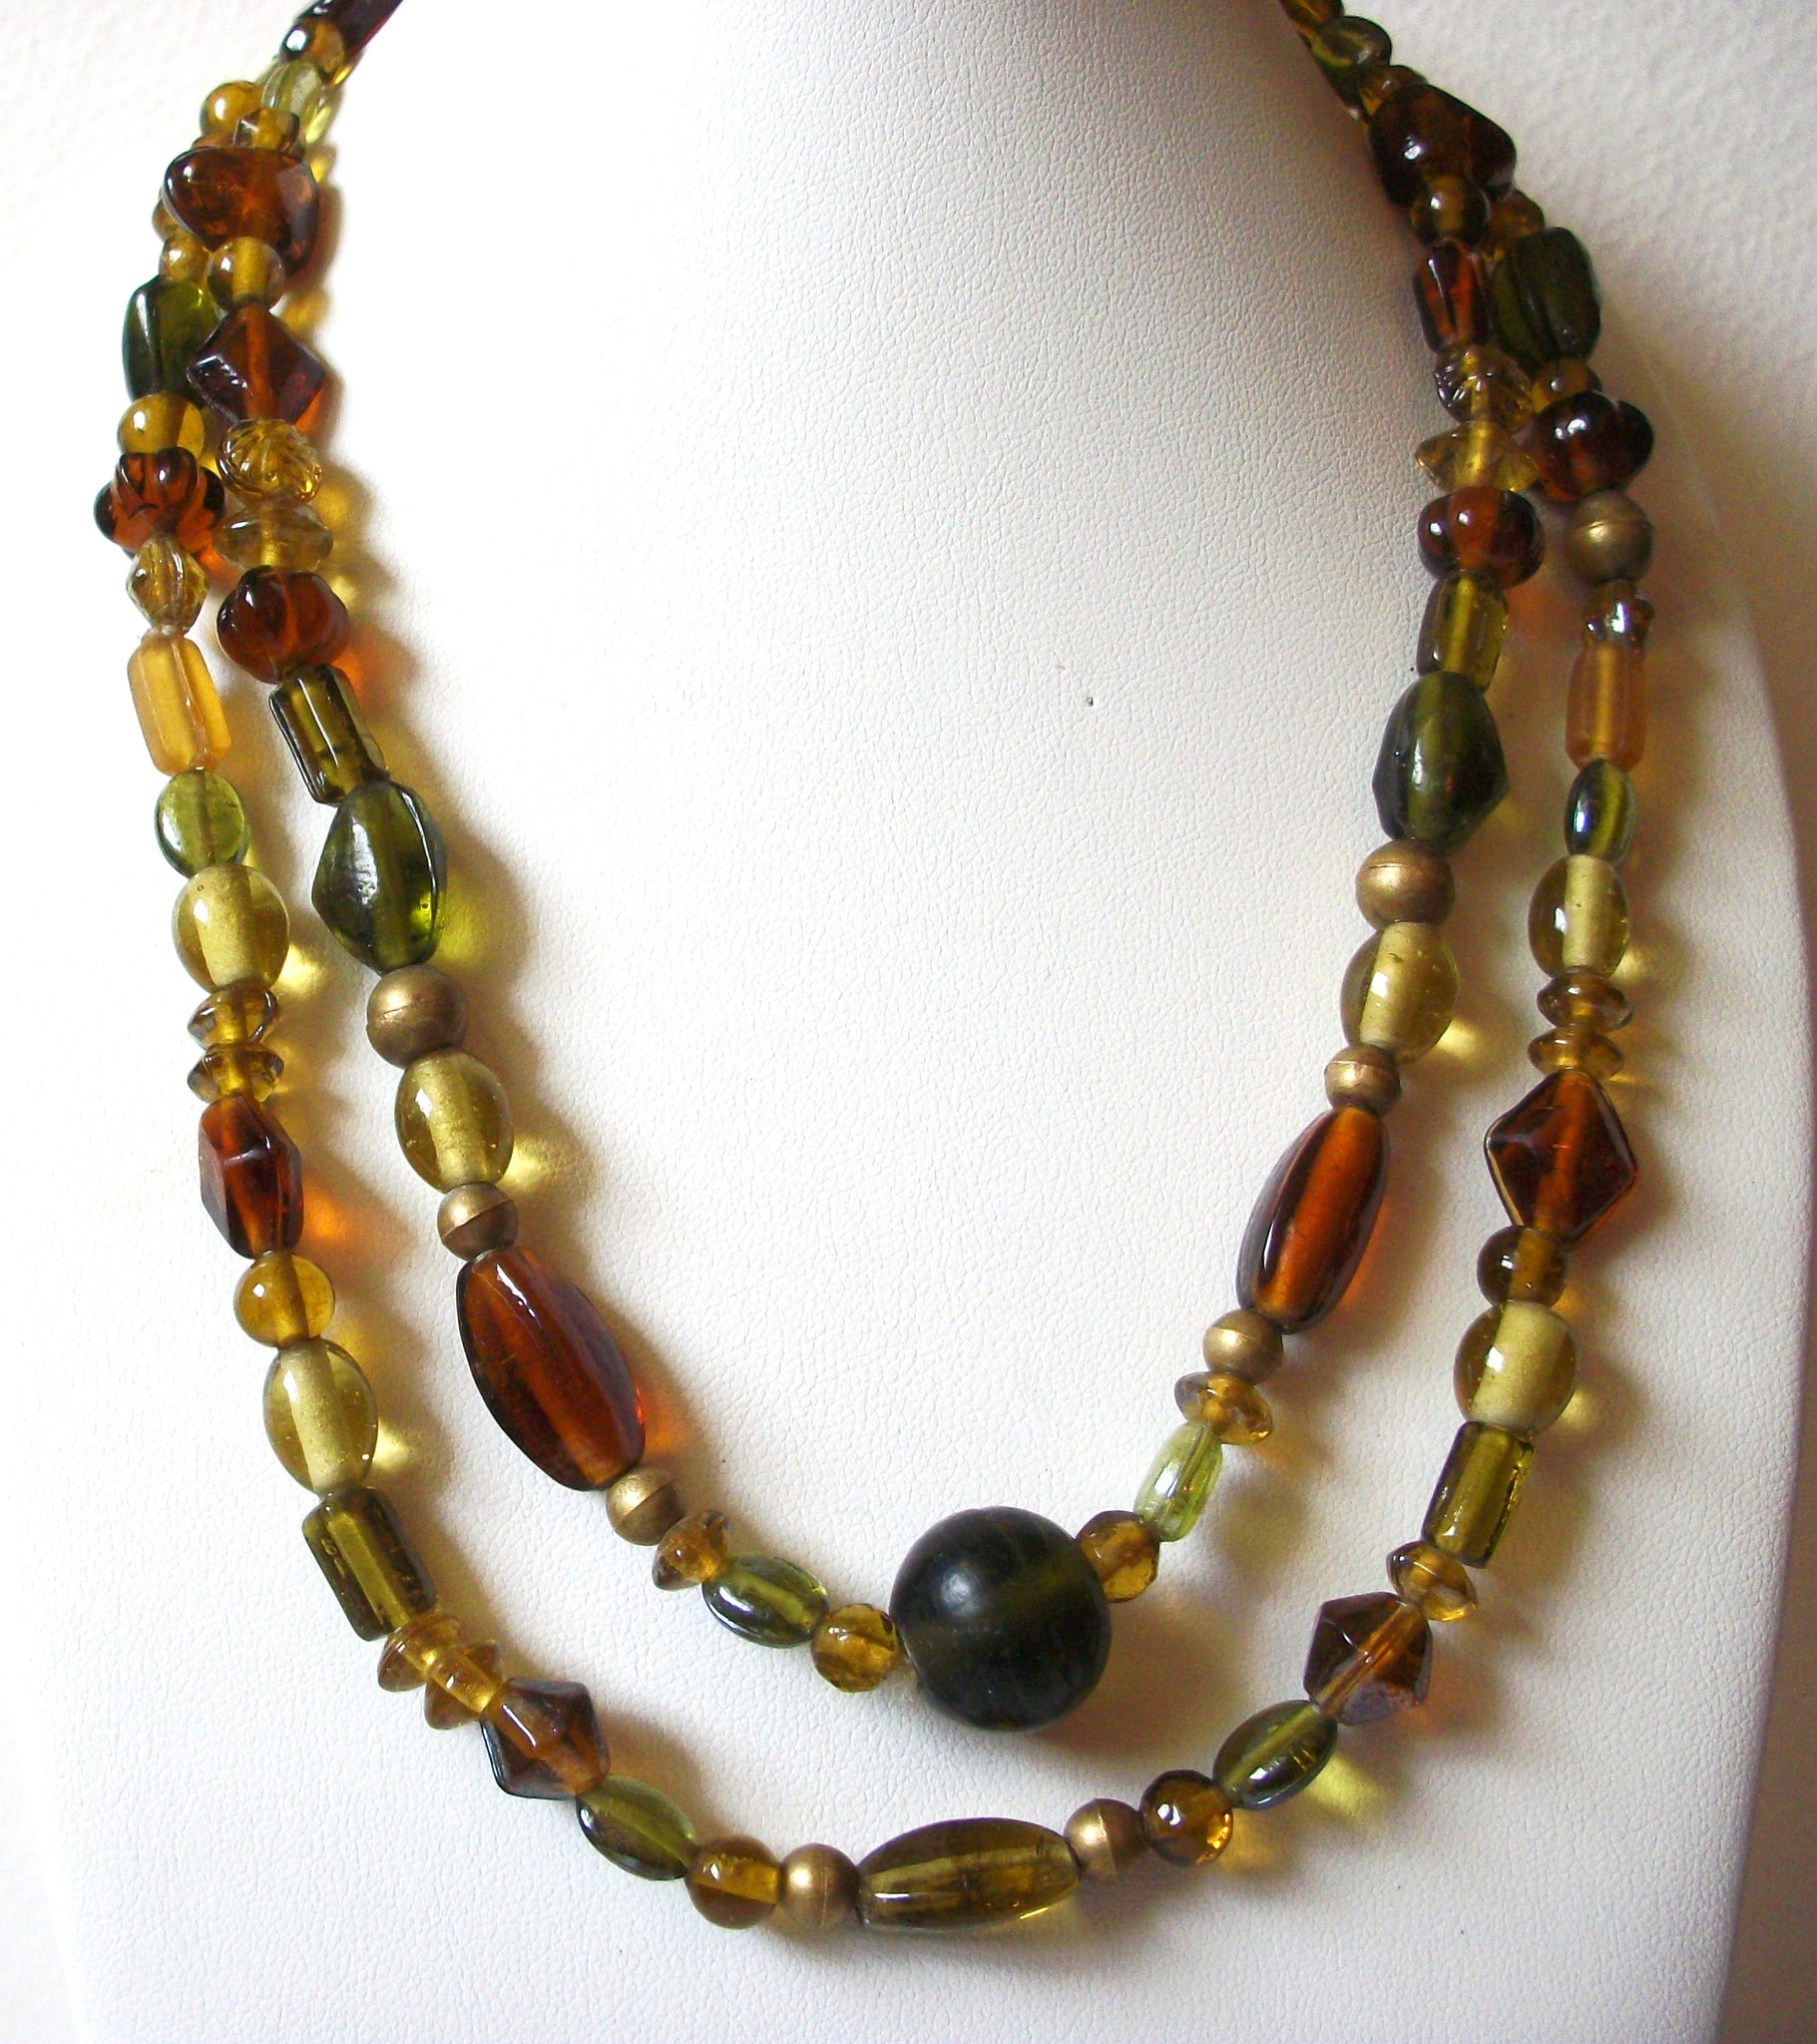 Vintage Tumbled Glass Necklace 81620